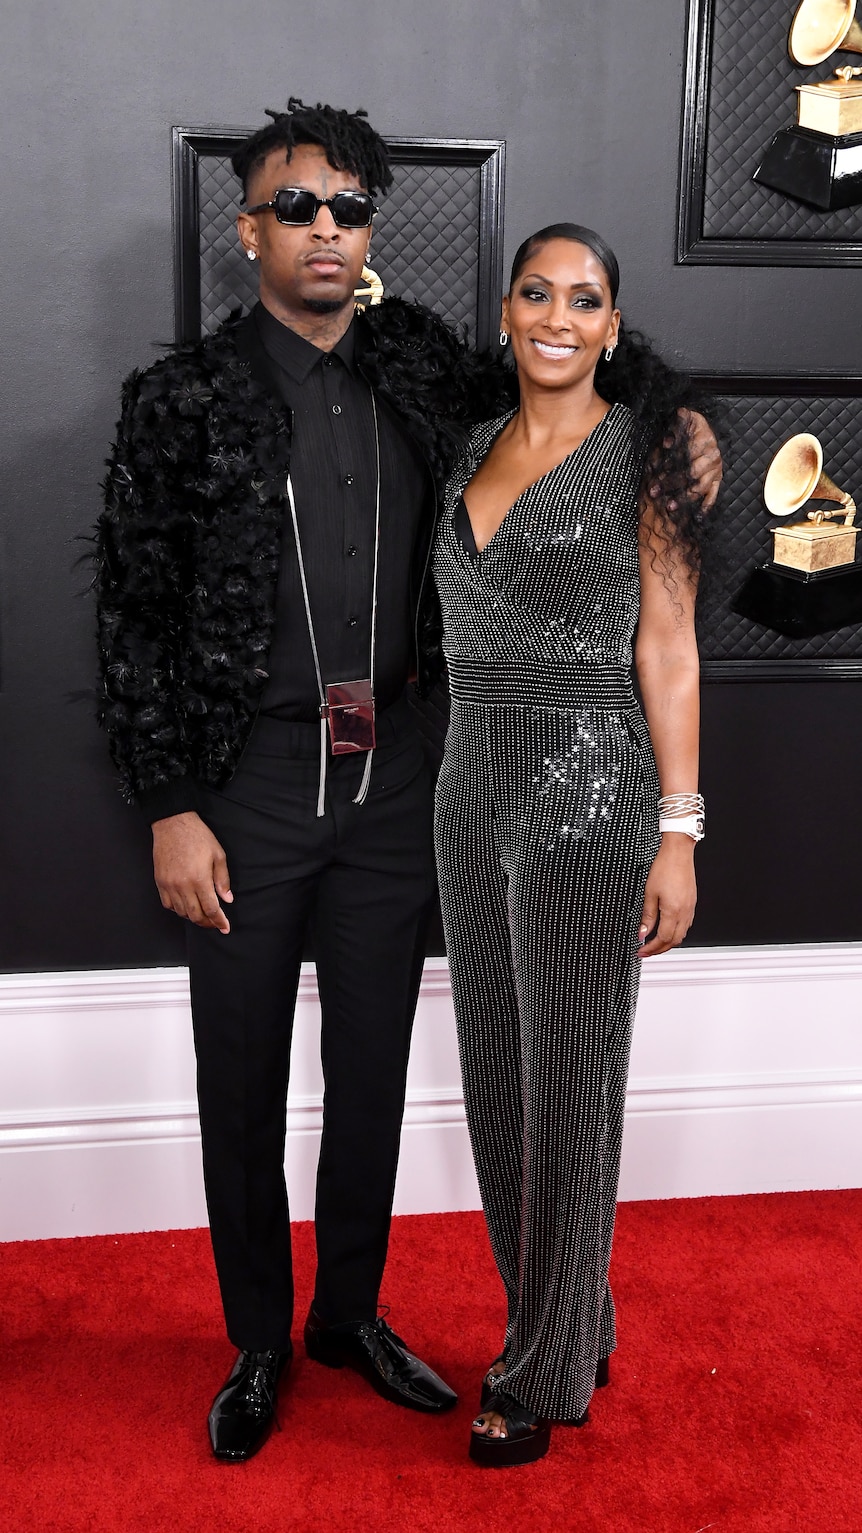 21 Savage wearing a black feathered jacket, standing next to his mother who is wearing a black evening gown